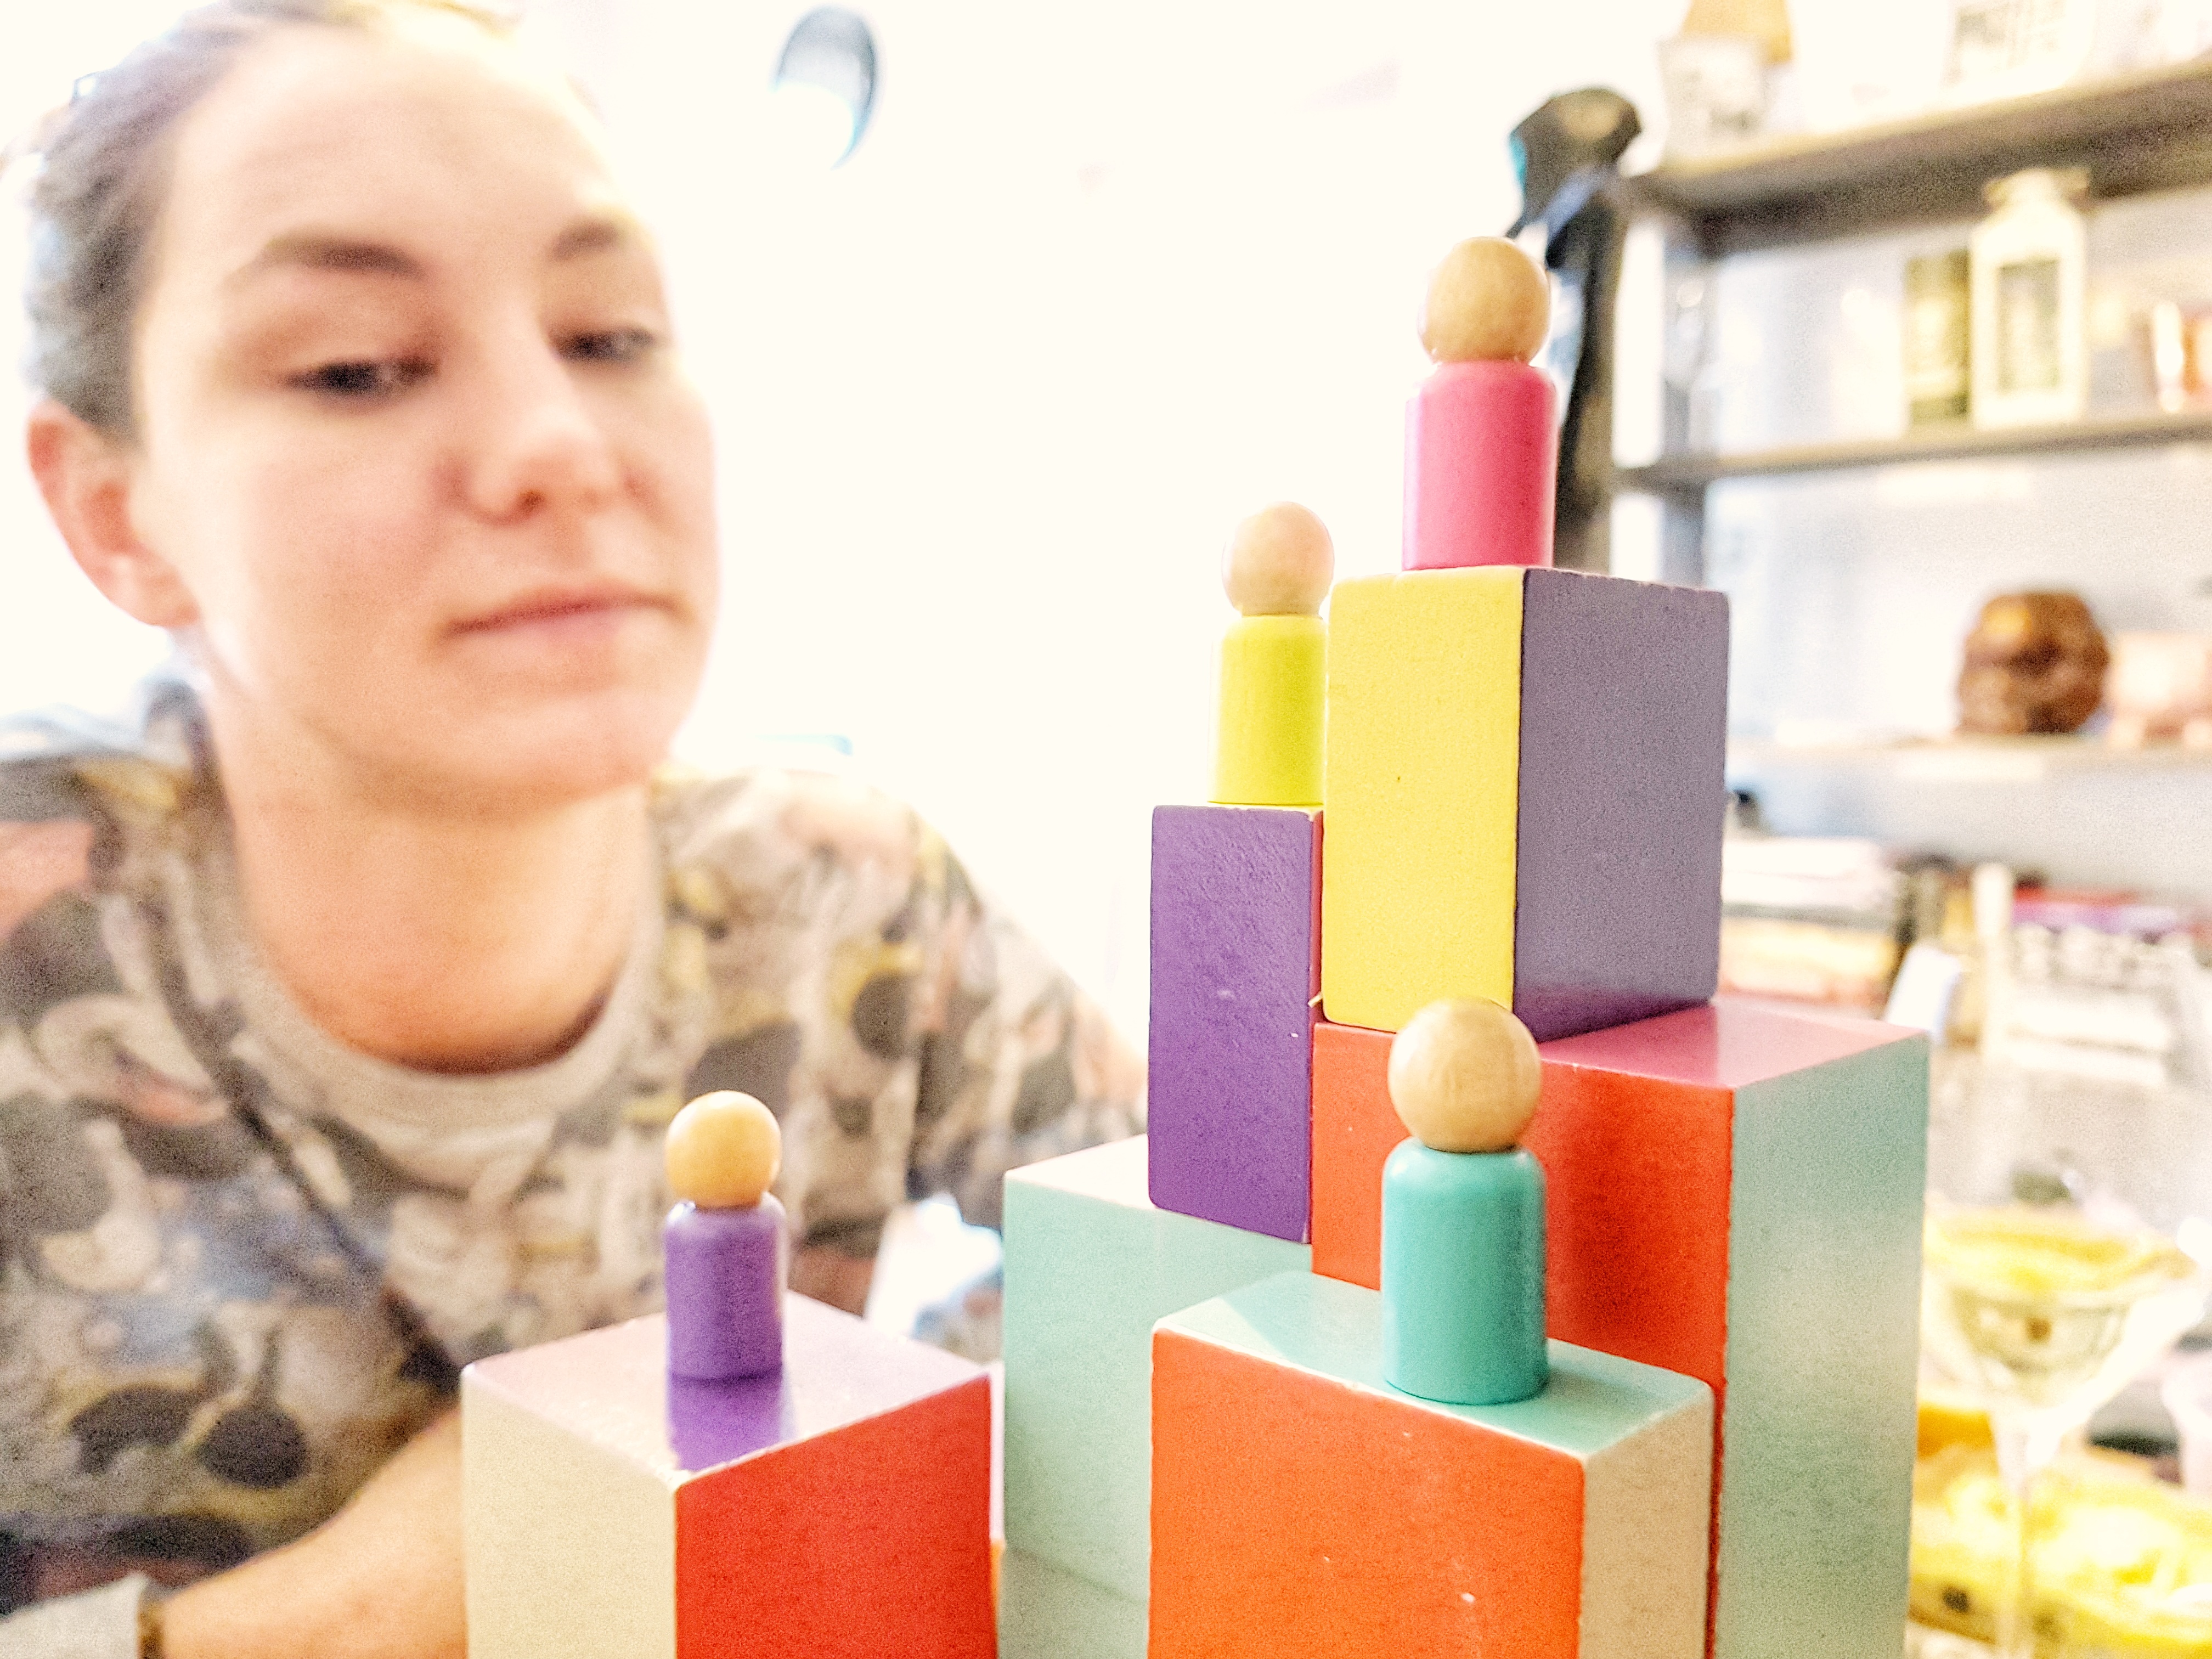 Board games are fun with Capstone Games The Climbers and Simply Complex. Player pieces and stacks of blocks